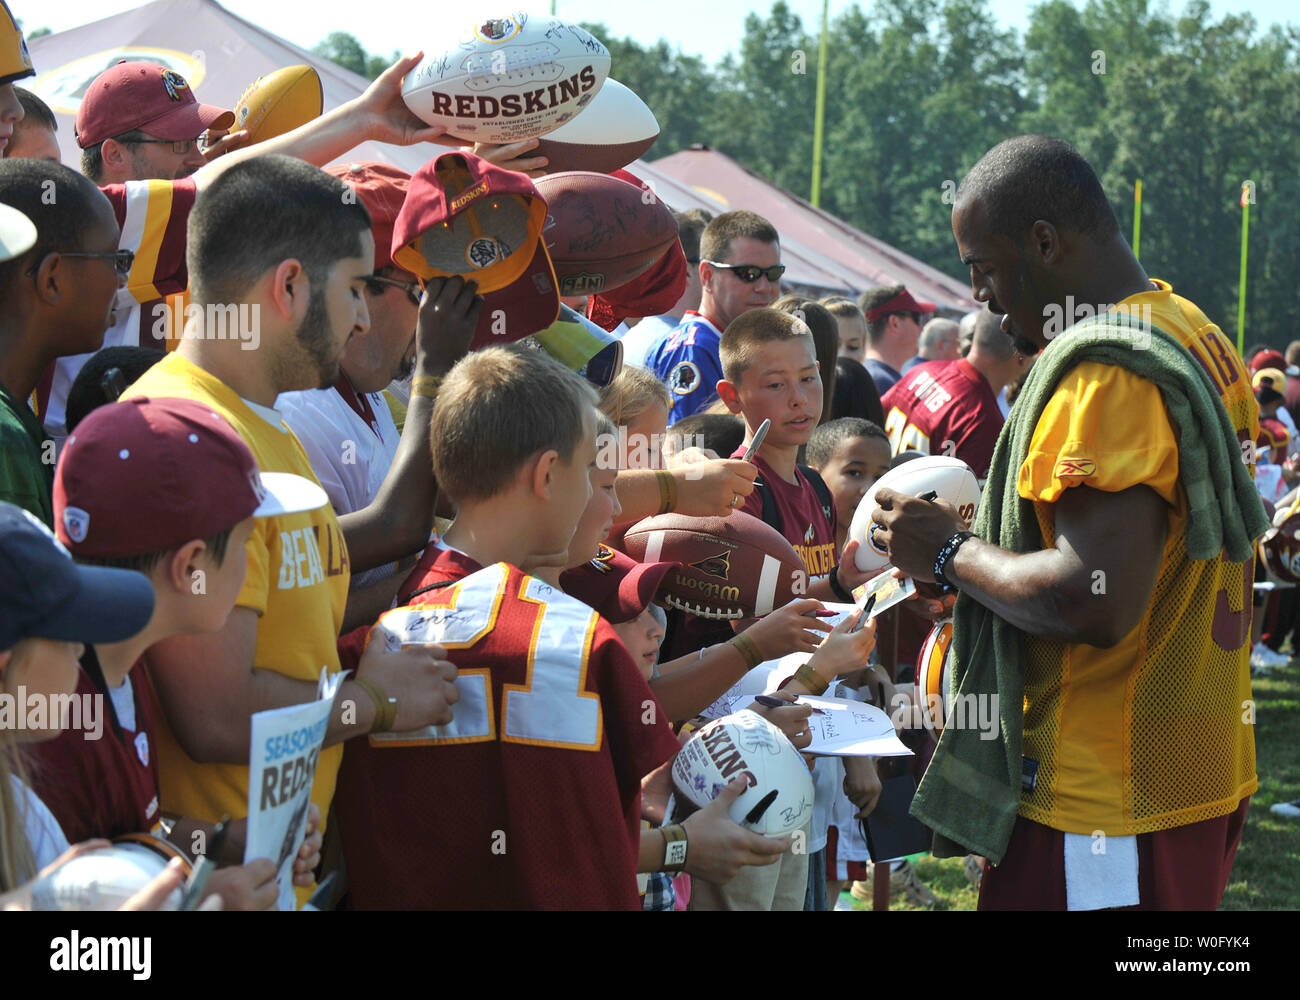 Washington Redskins quarterback Donovan McNabb signs autographs after the Redskins last day of training camp at Redskins Park in Ashburn, Virginia, August 19, 2010. UPI/Kevin Dietsch Stock Photo